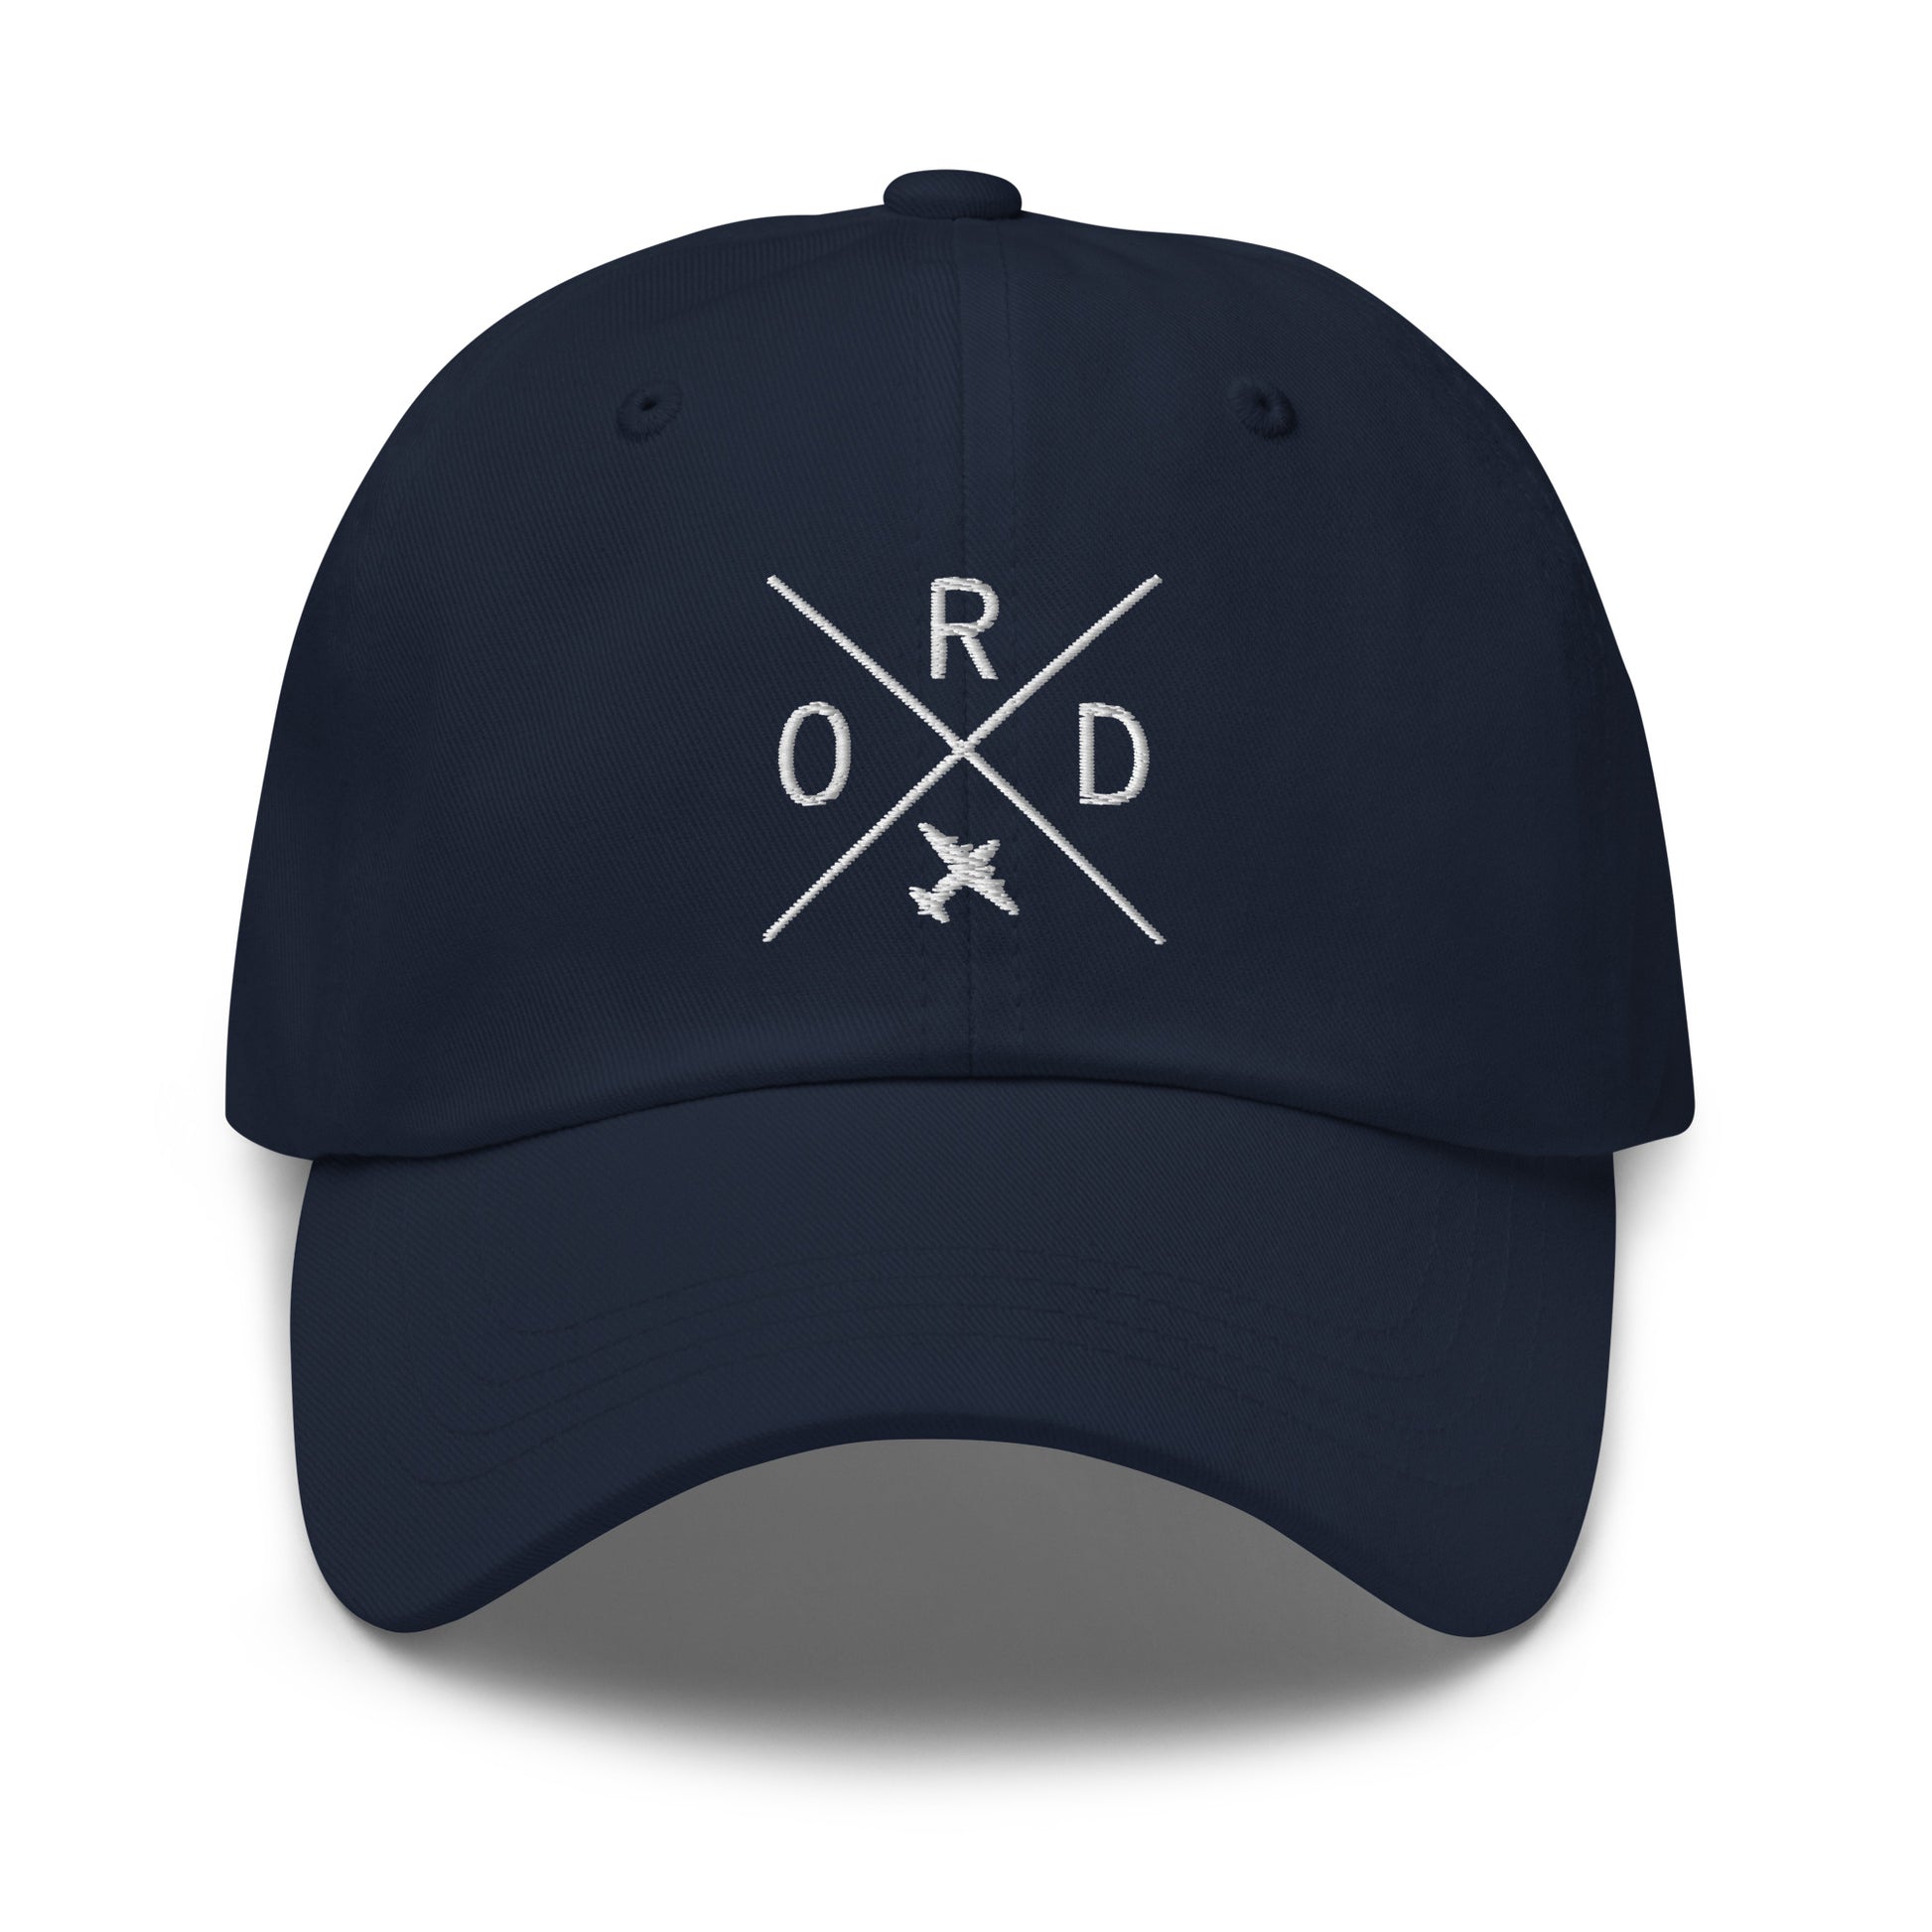 Crossed-X Dad Hat - White • ORD Chicago • YHM Designs - Image 16